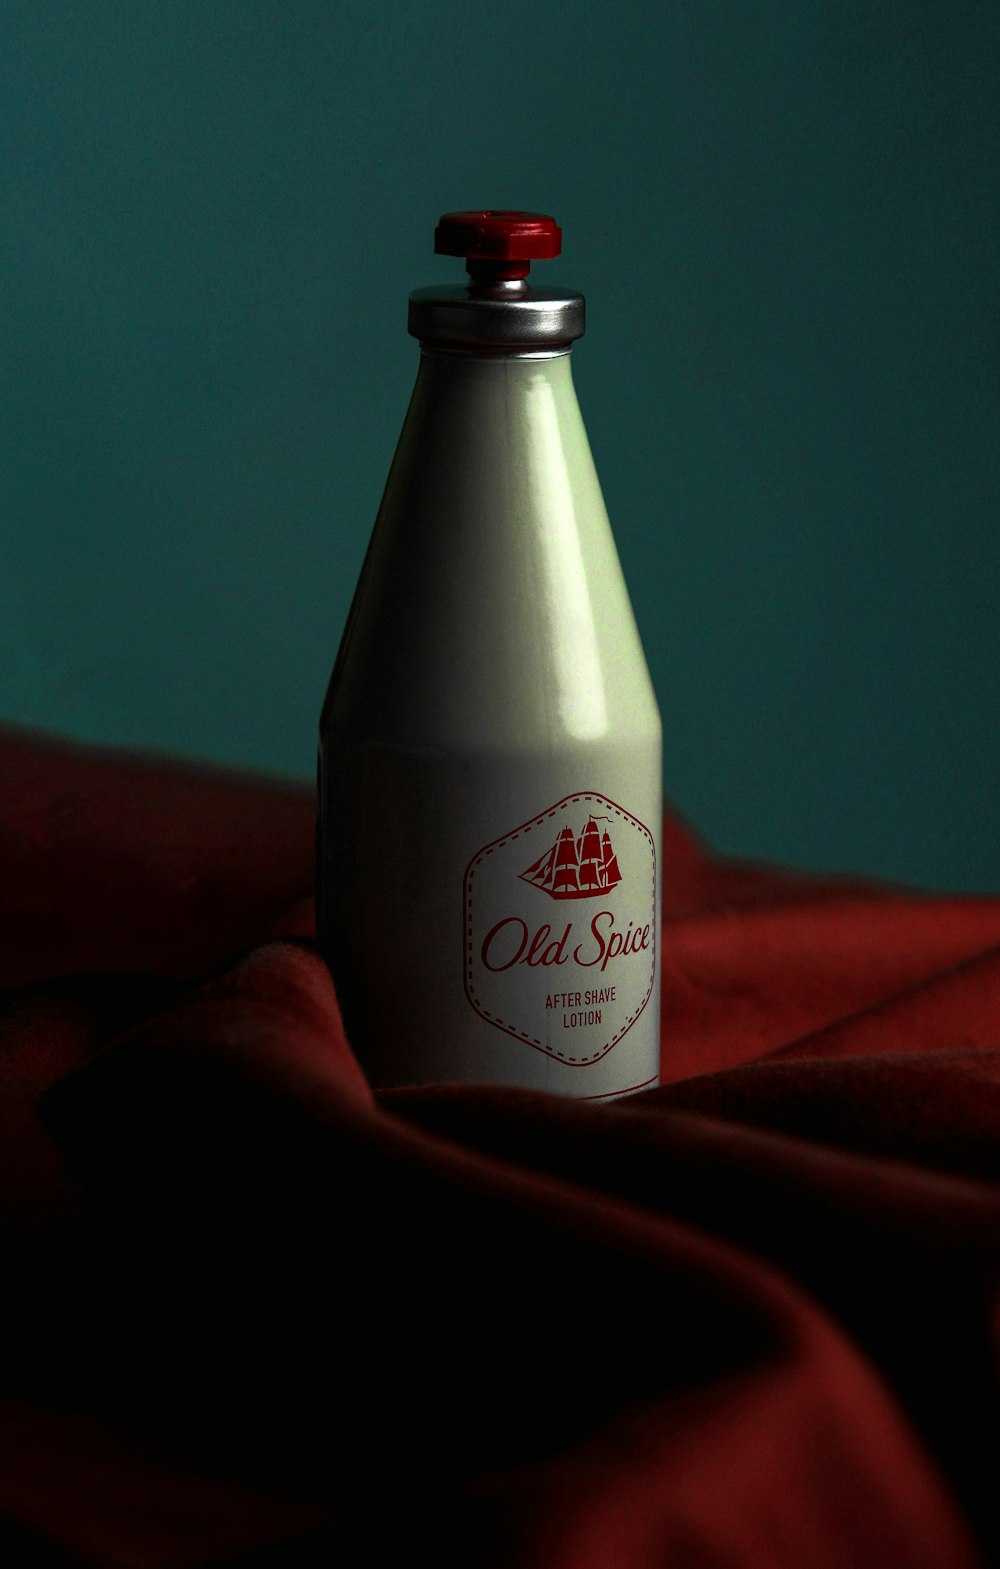 a bottle of old spice sitting on a red cloth